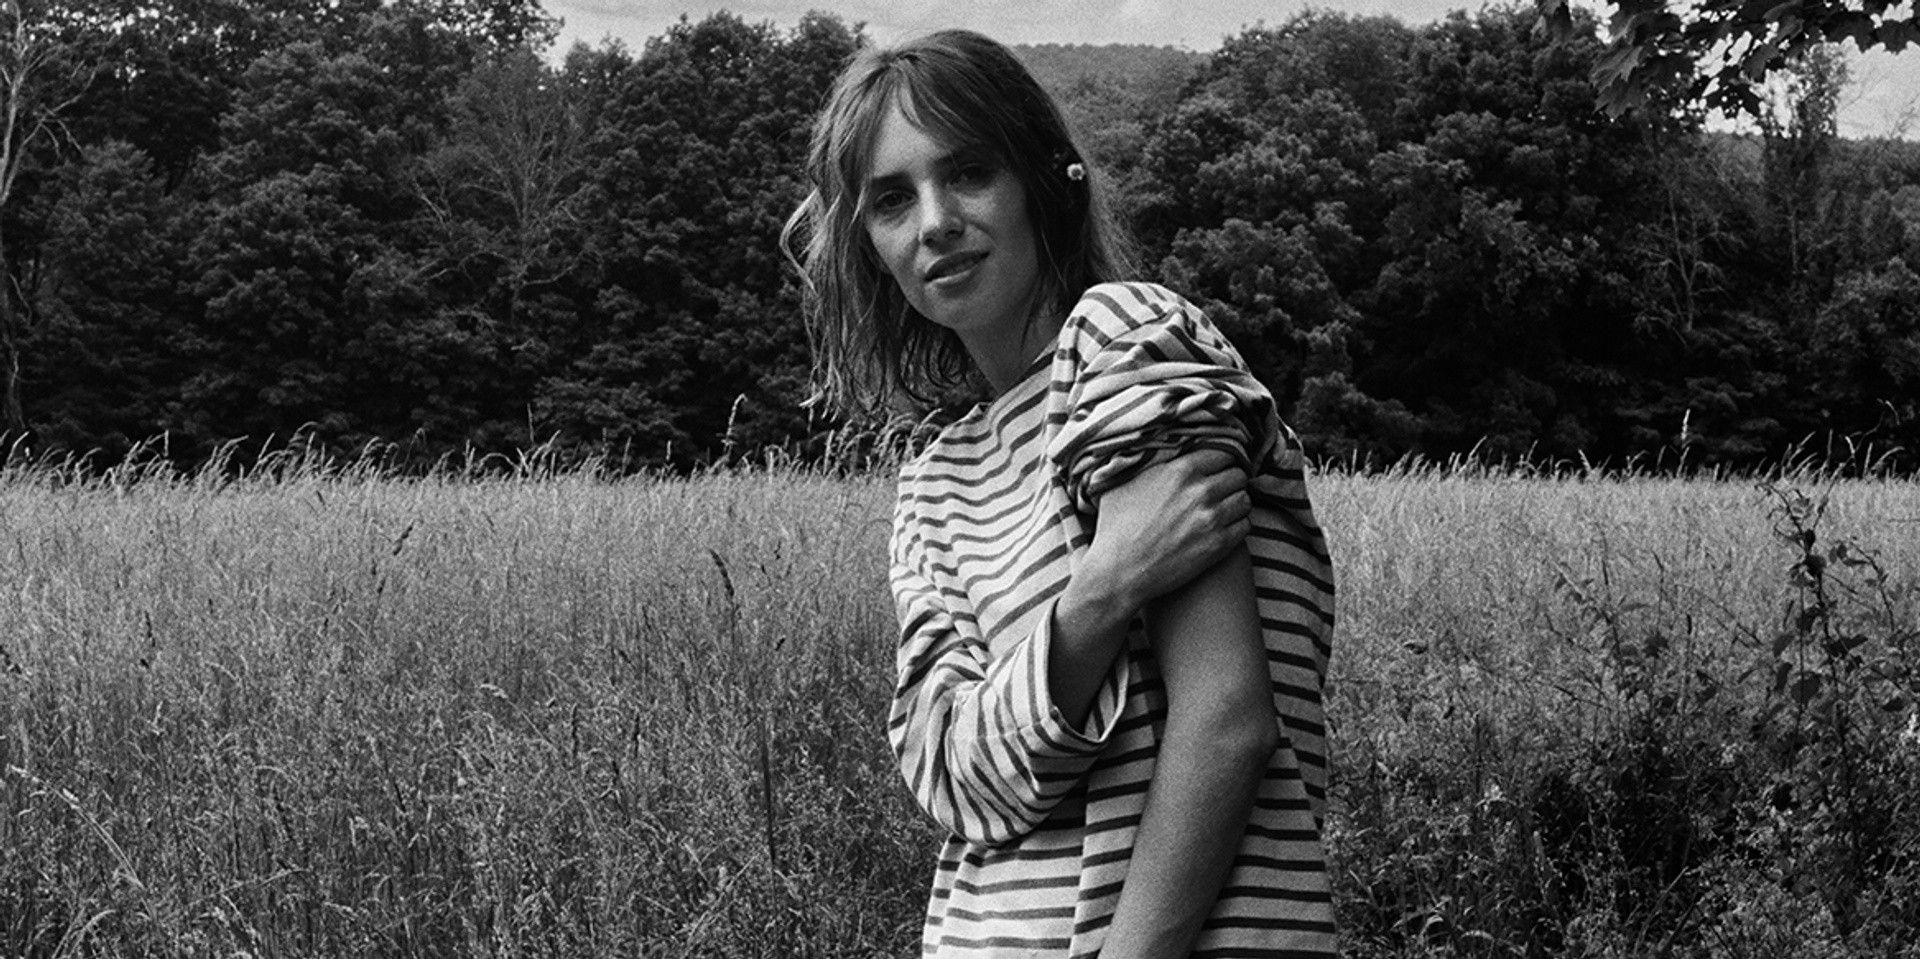 Maya Hawke previews forthcoming album with new single 'Sweet Tooth' — watch